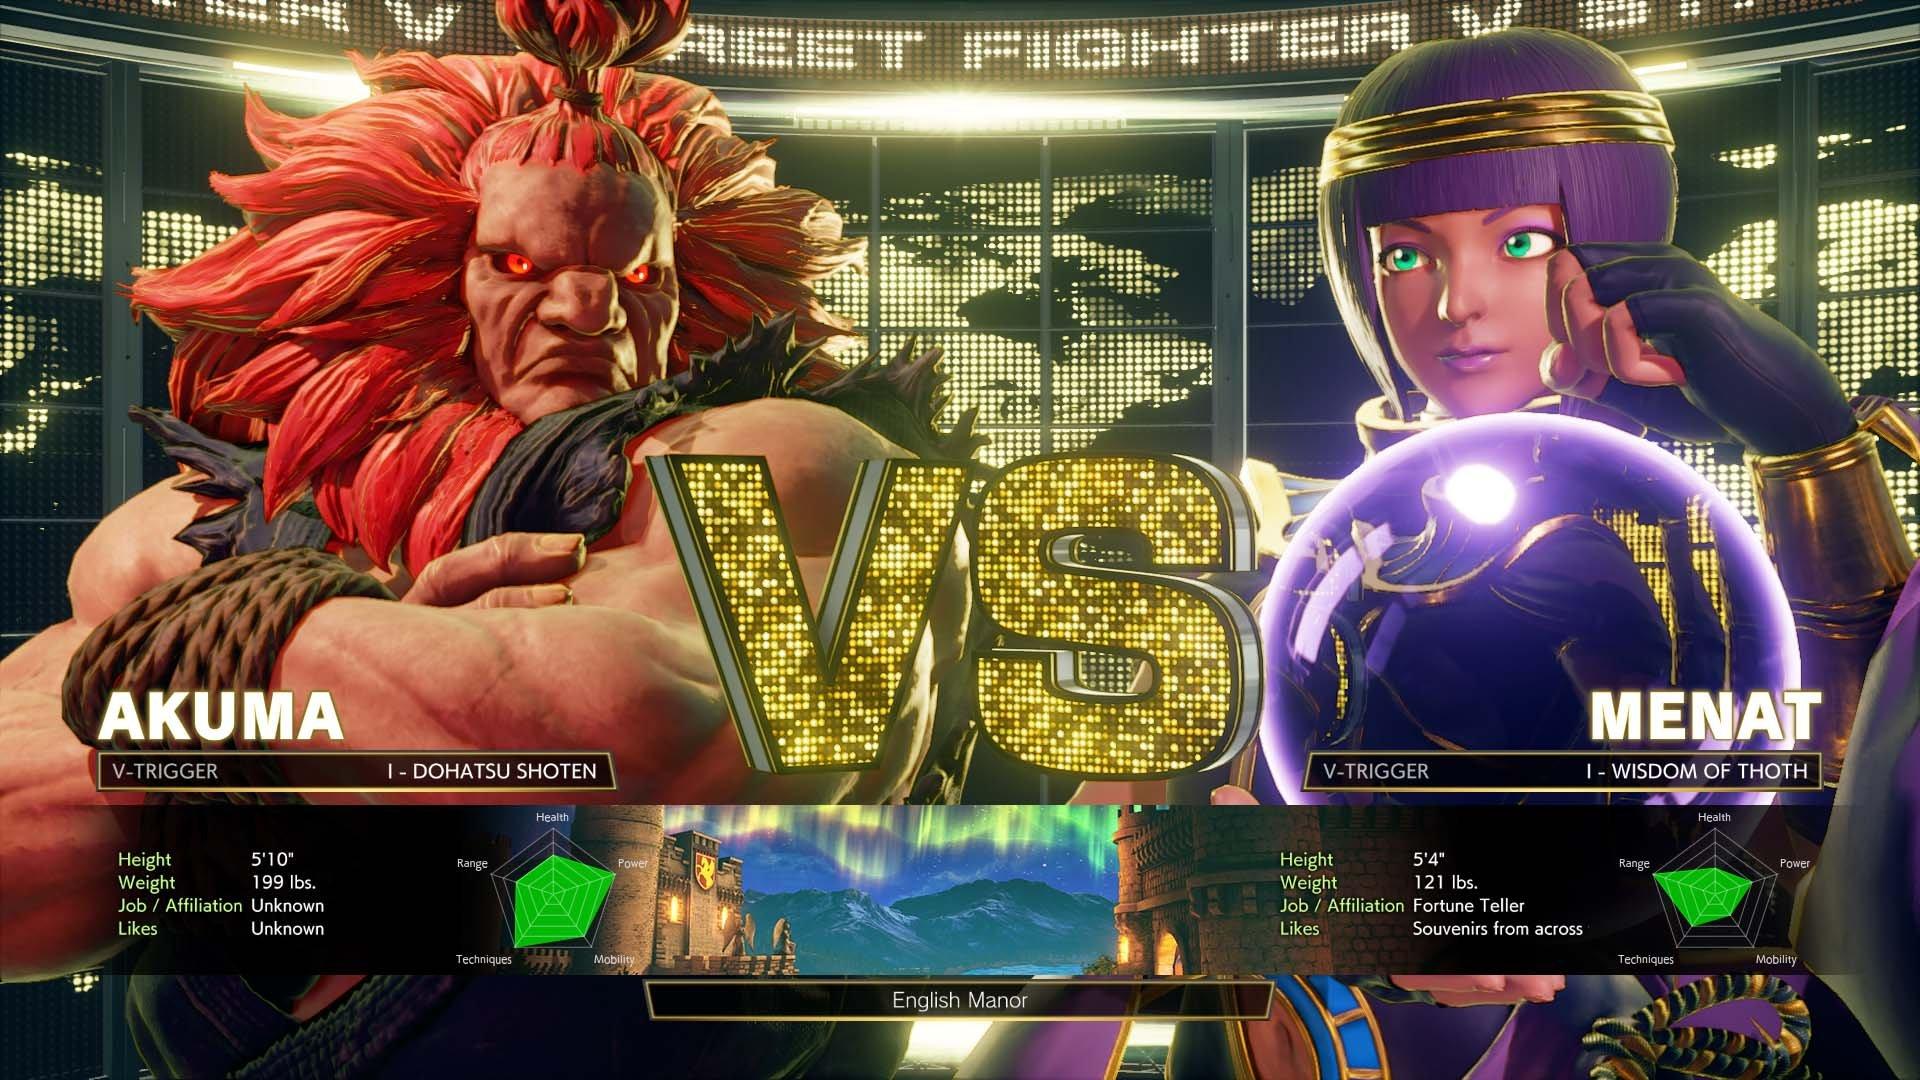 Street Fighter on X: Street Fighter V on #PS4 and #Steam is ON